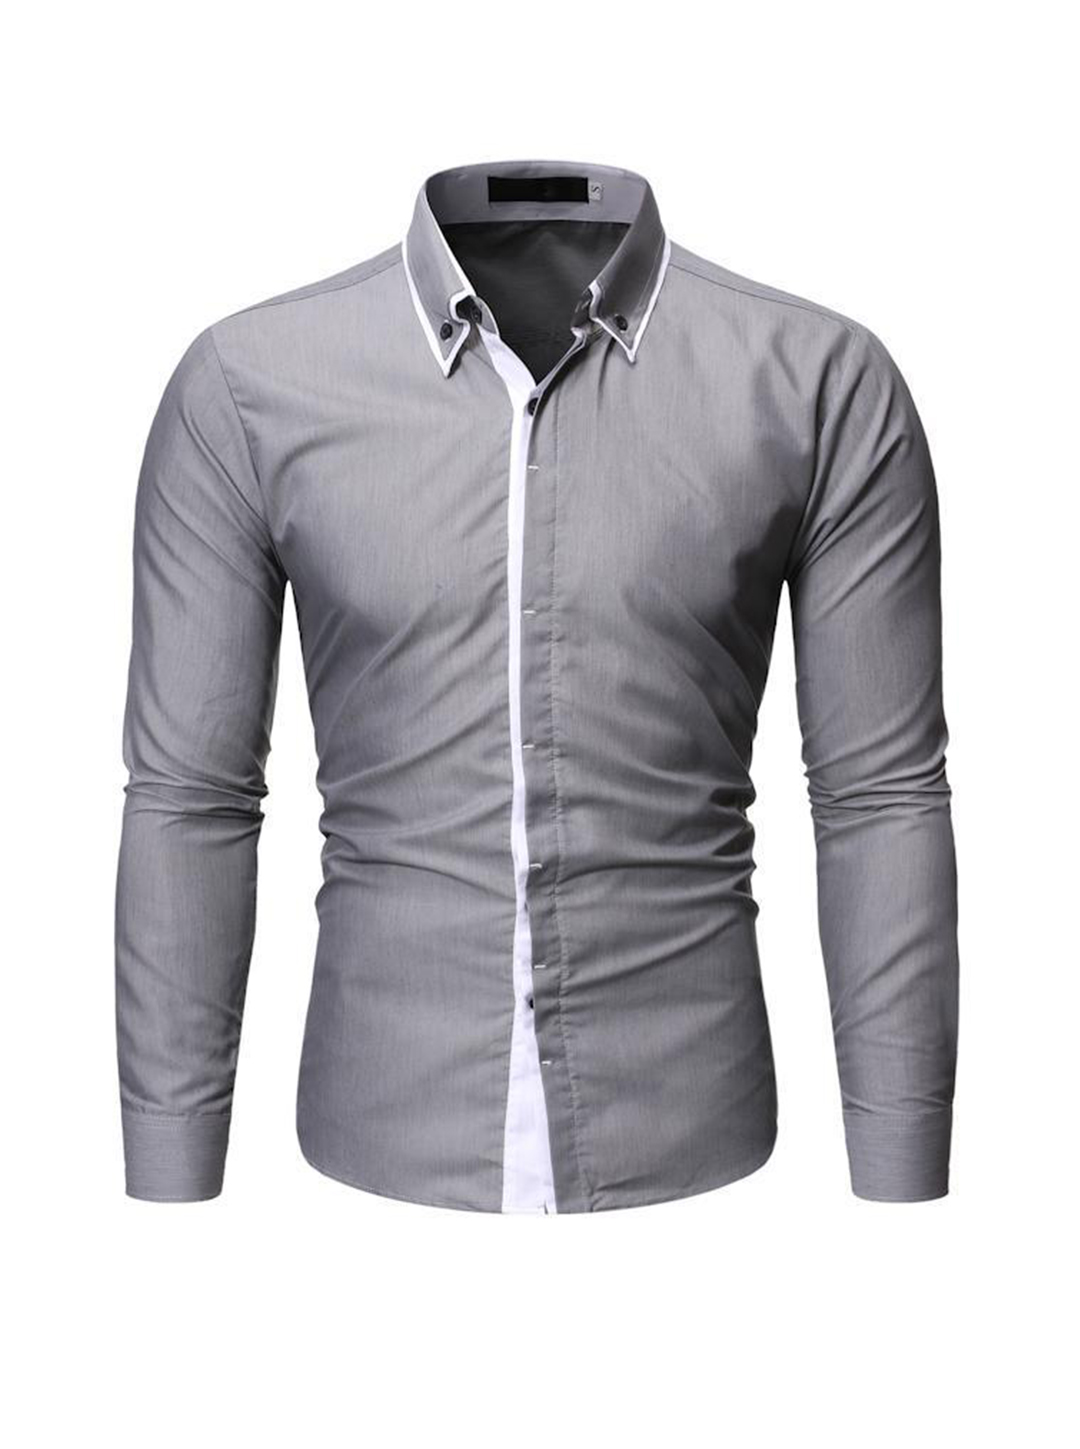 Poisonstreetwear Men's Contrasting Colors Casual Shirt-poisonstreetwear.com